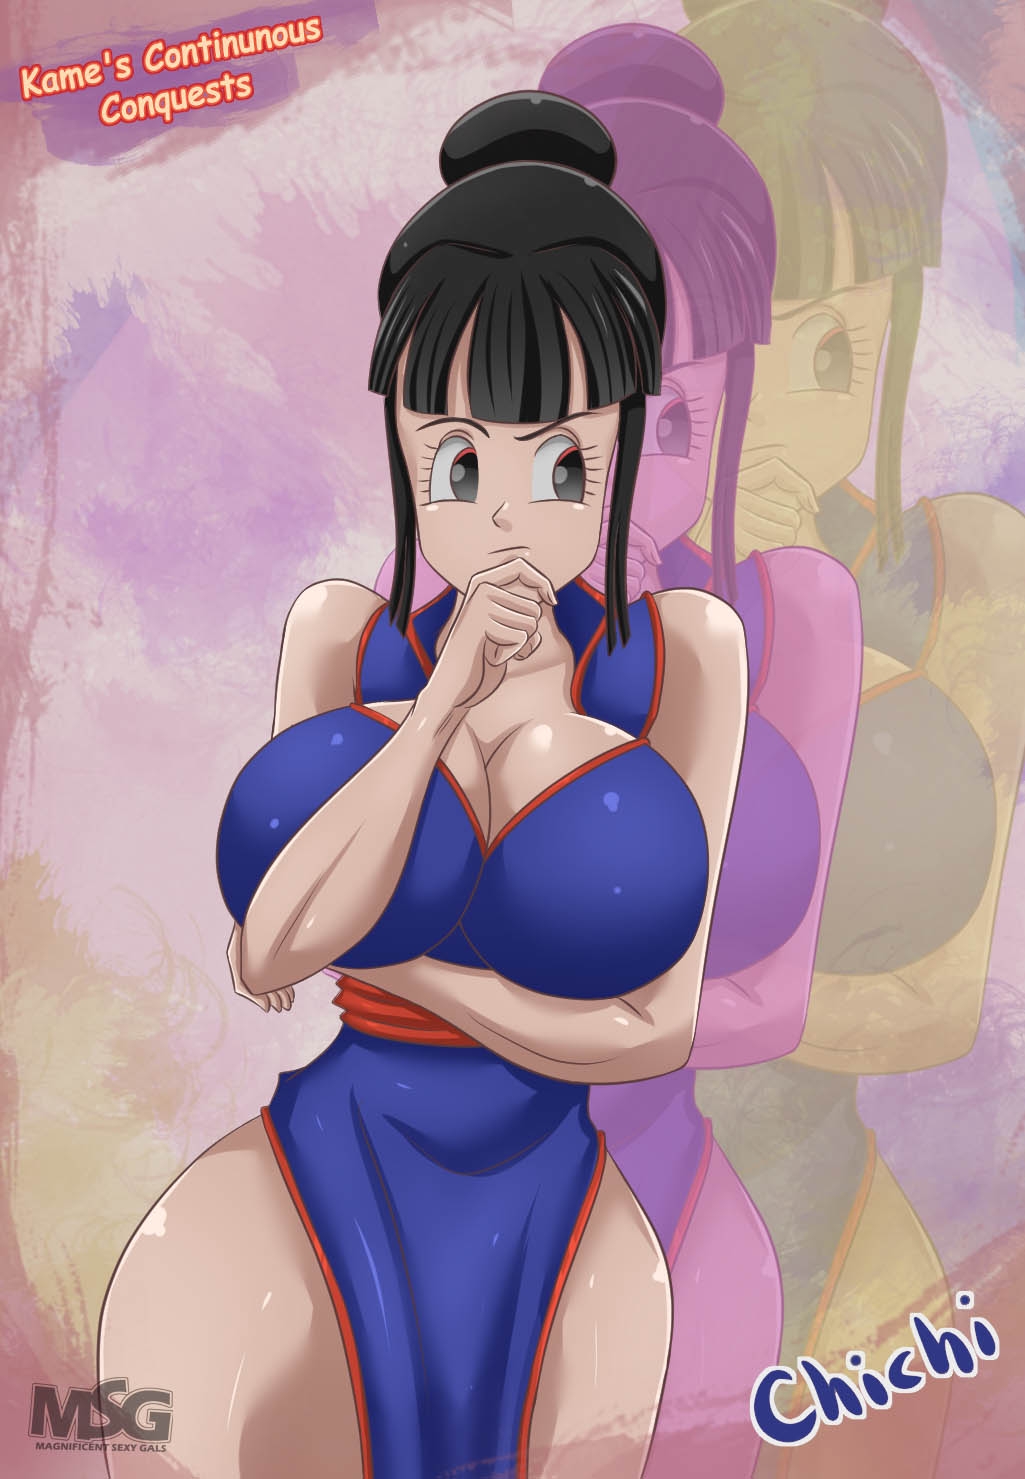 [Magnificent Sexy Gals] Kame's Continuous Conquest (Dragon Ball Z) 1